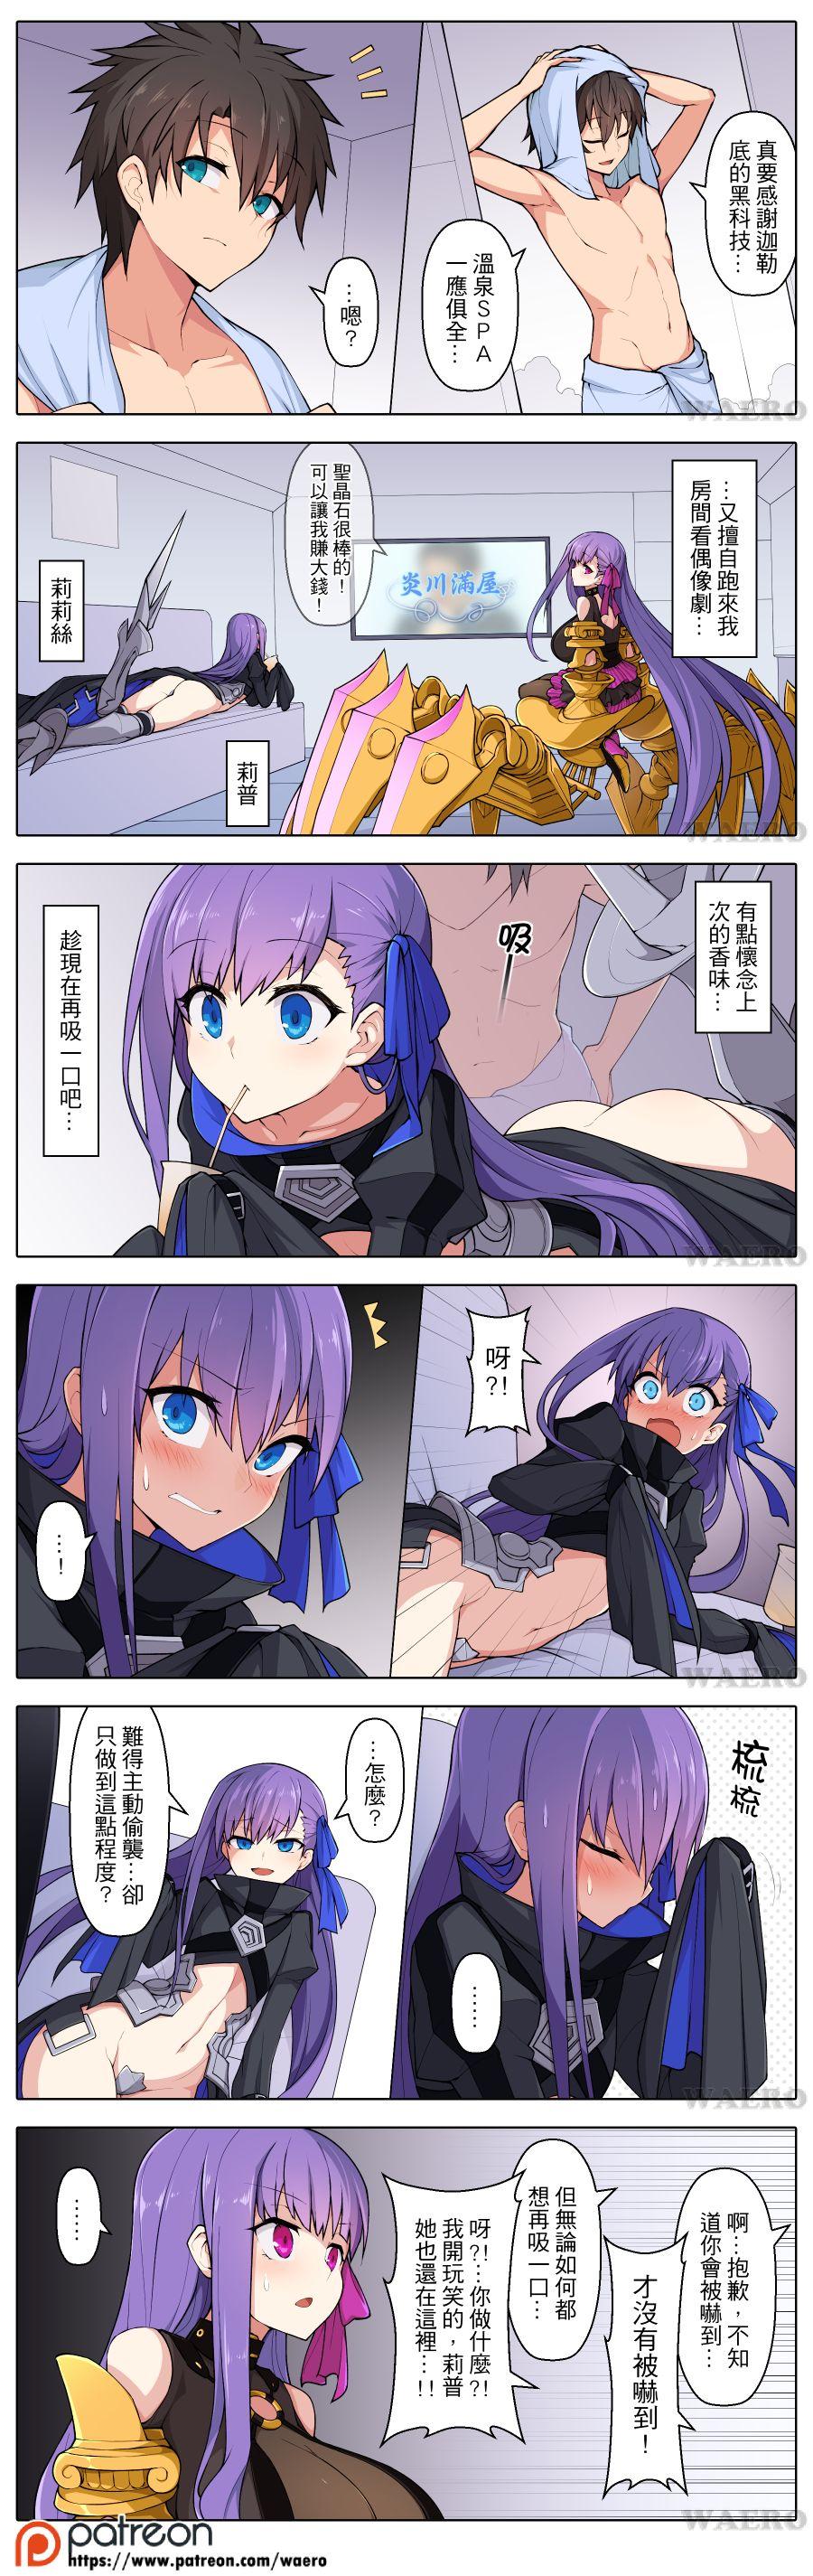 Pack Lust Grand Order - Fate grand order Cunnilingus - Page 3